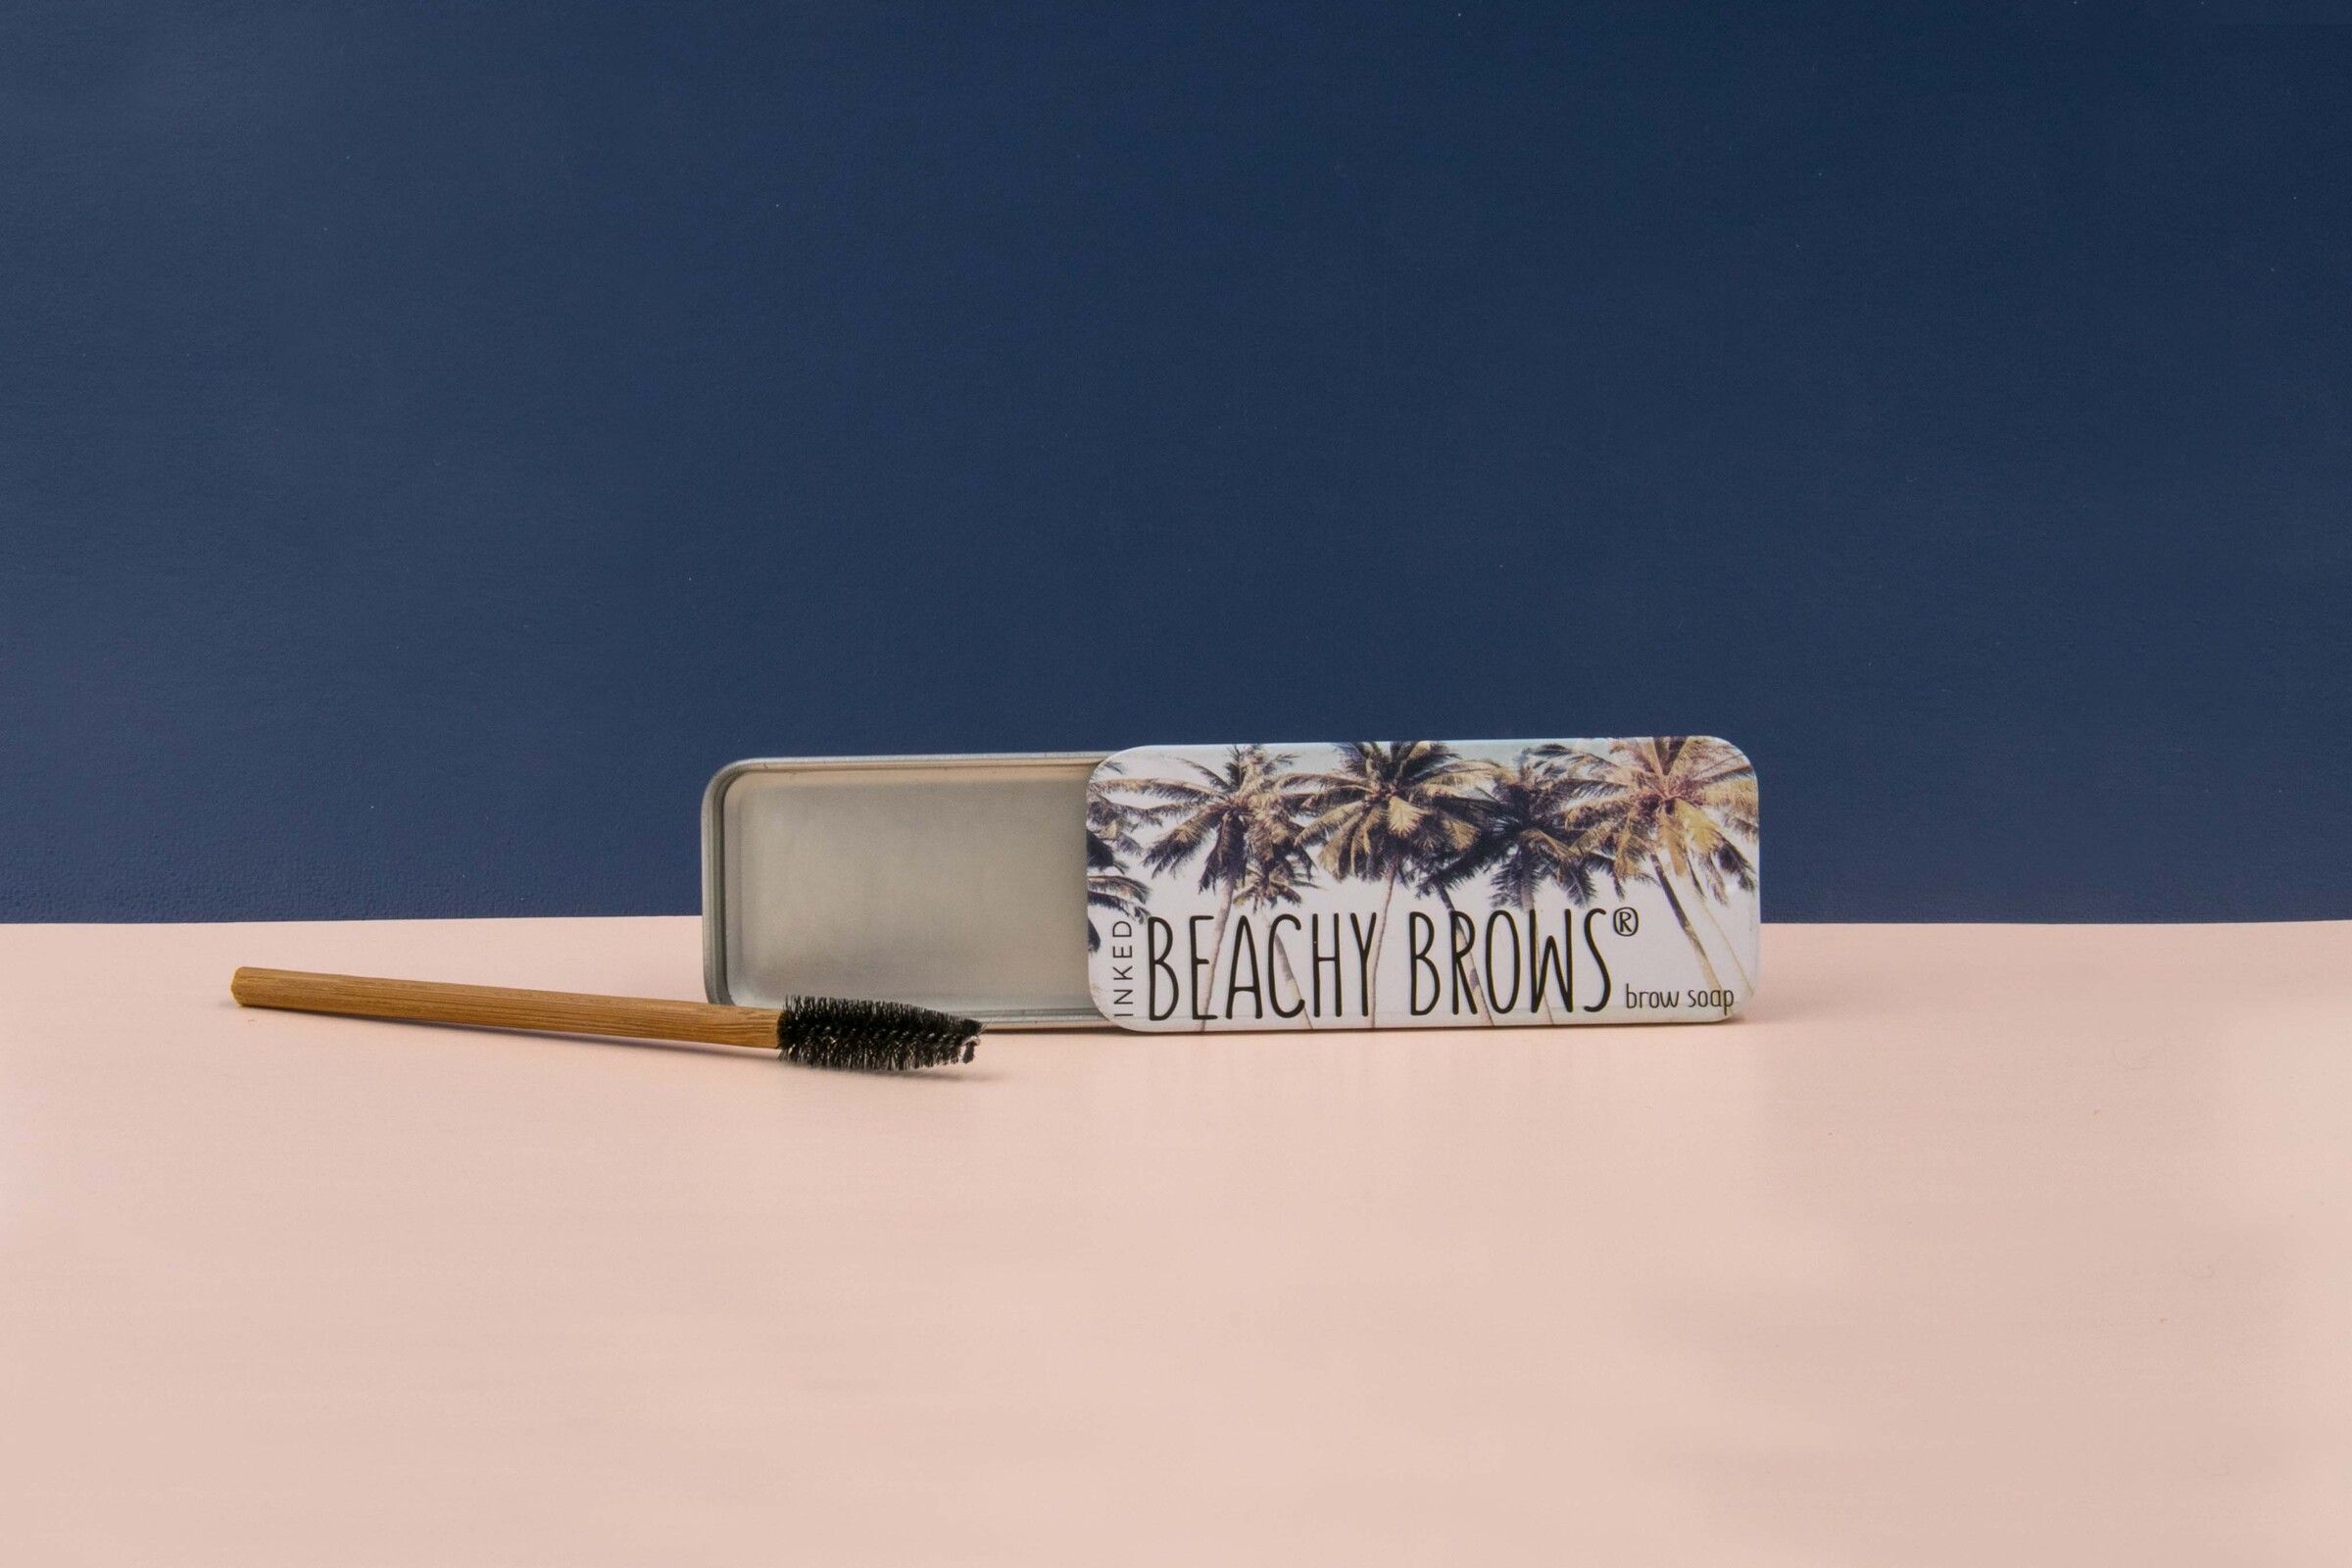 Beachy Brows Clear Brow Soap